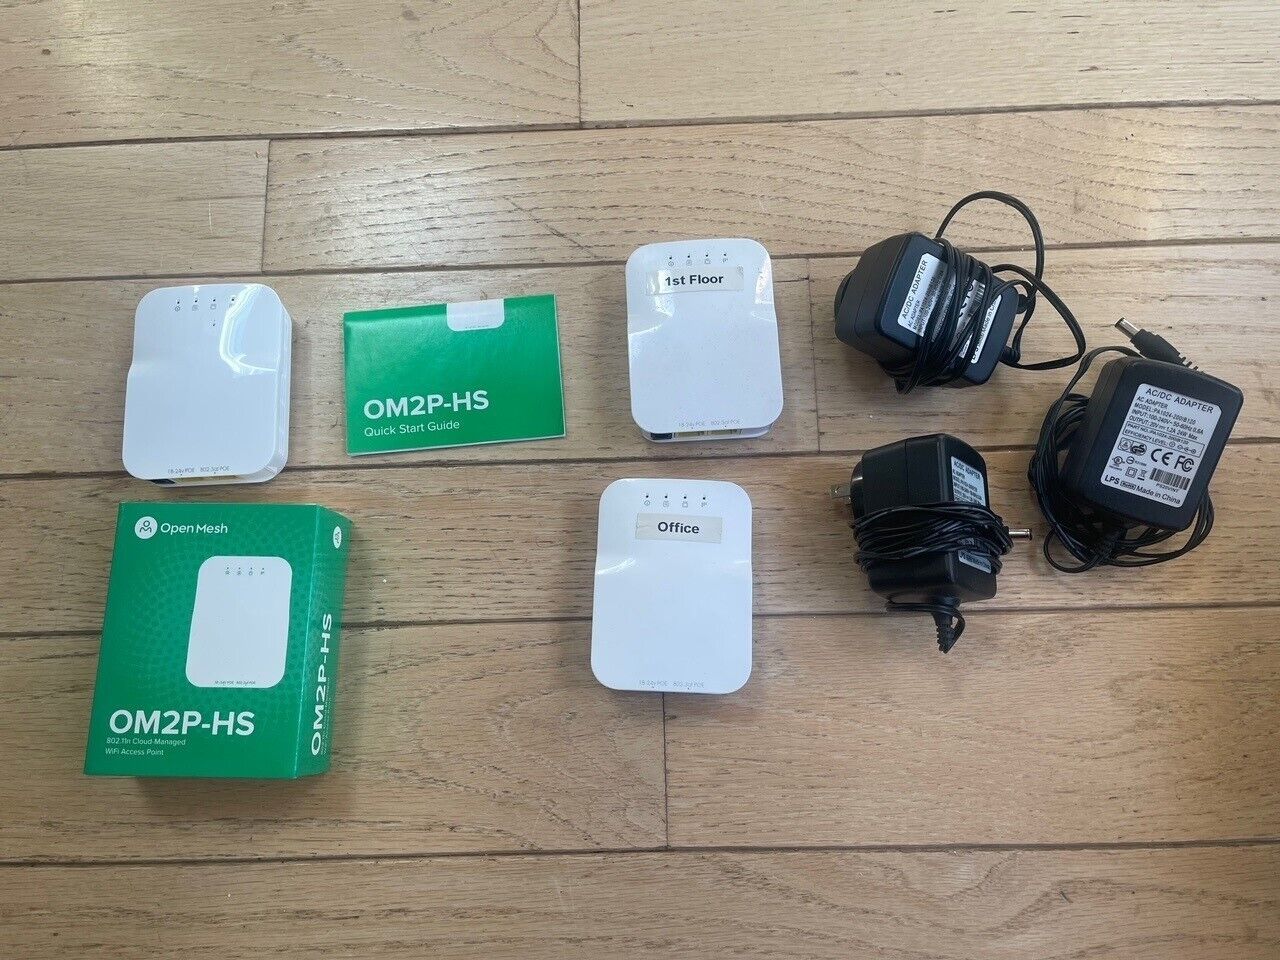 (4) x Open Mesh Access Point - OM2P-HS (1x New, 3x Used with 3 power supplies)